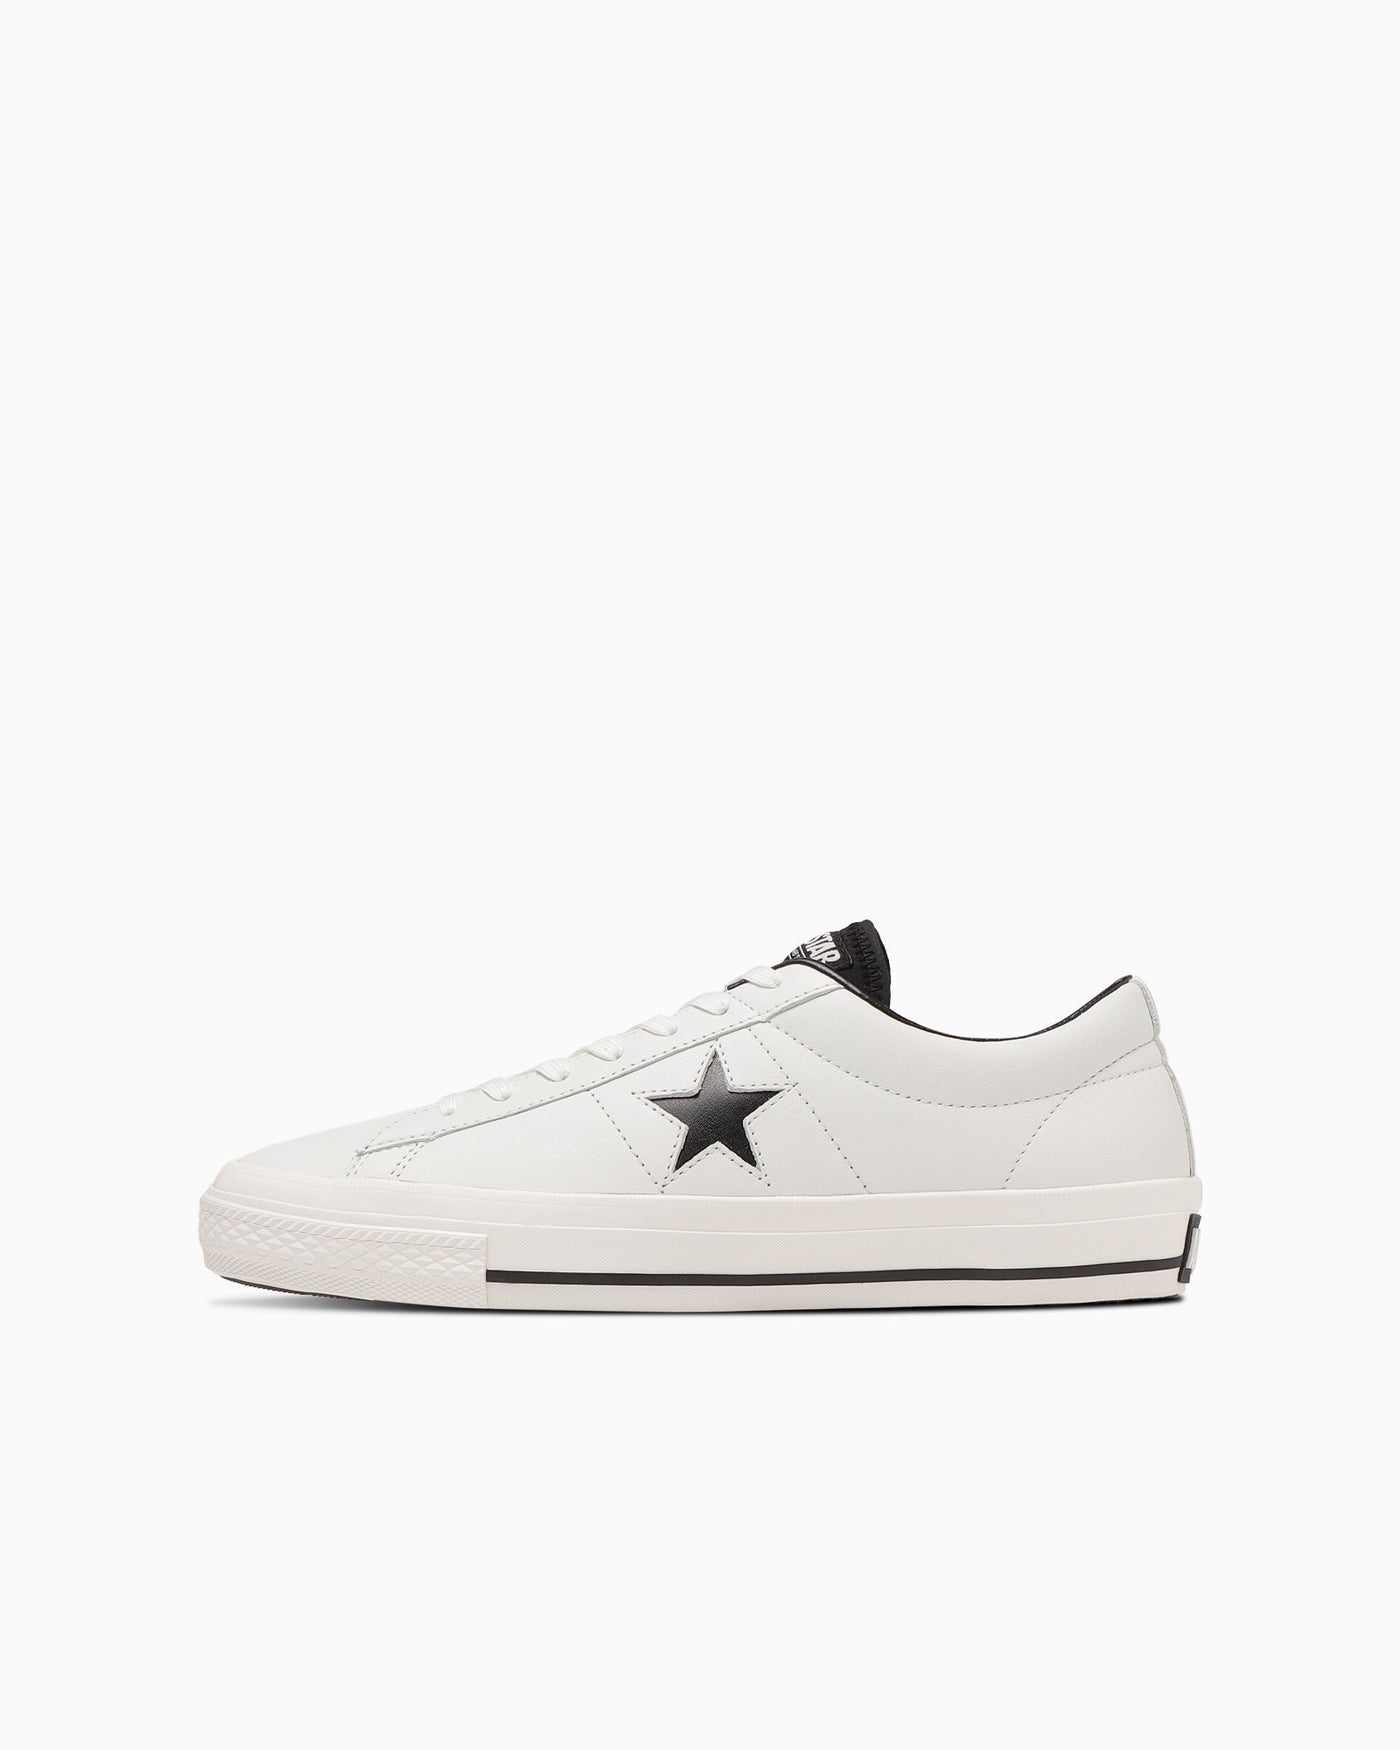 CONVERSE MADE FOR GOLF ONE STAR 27.5cm